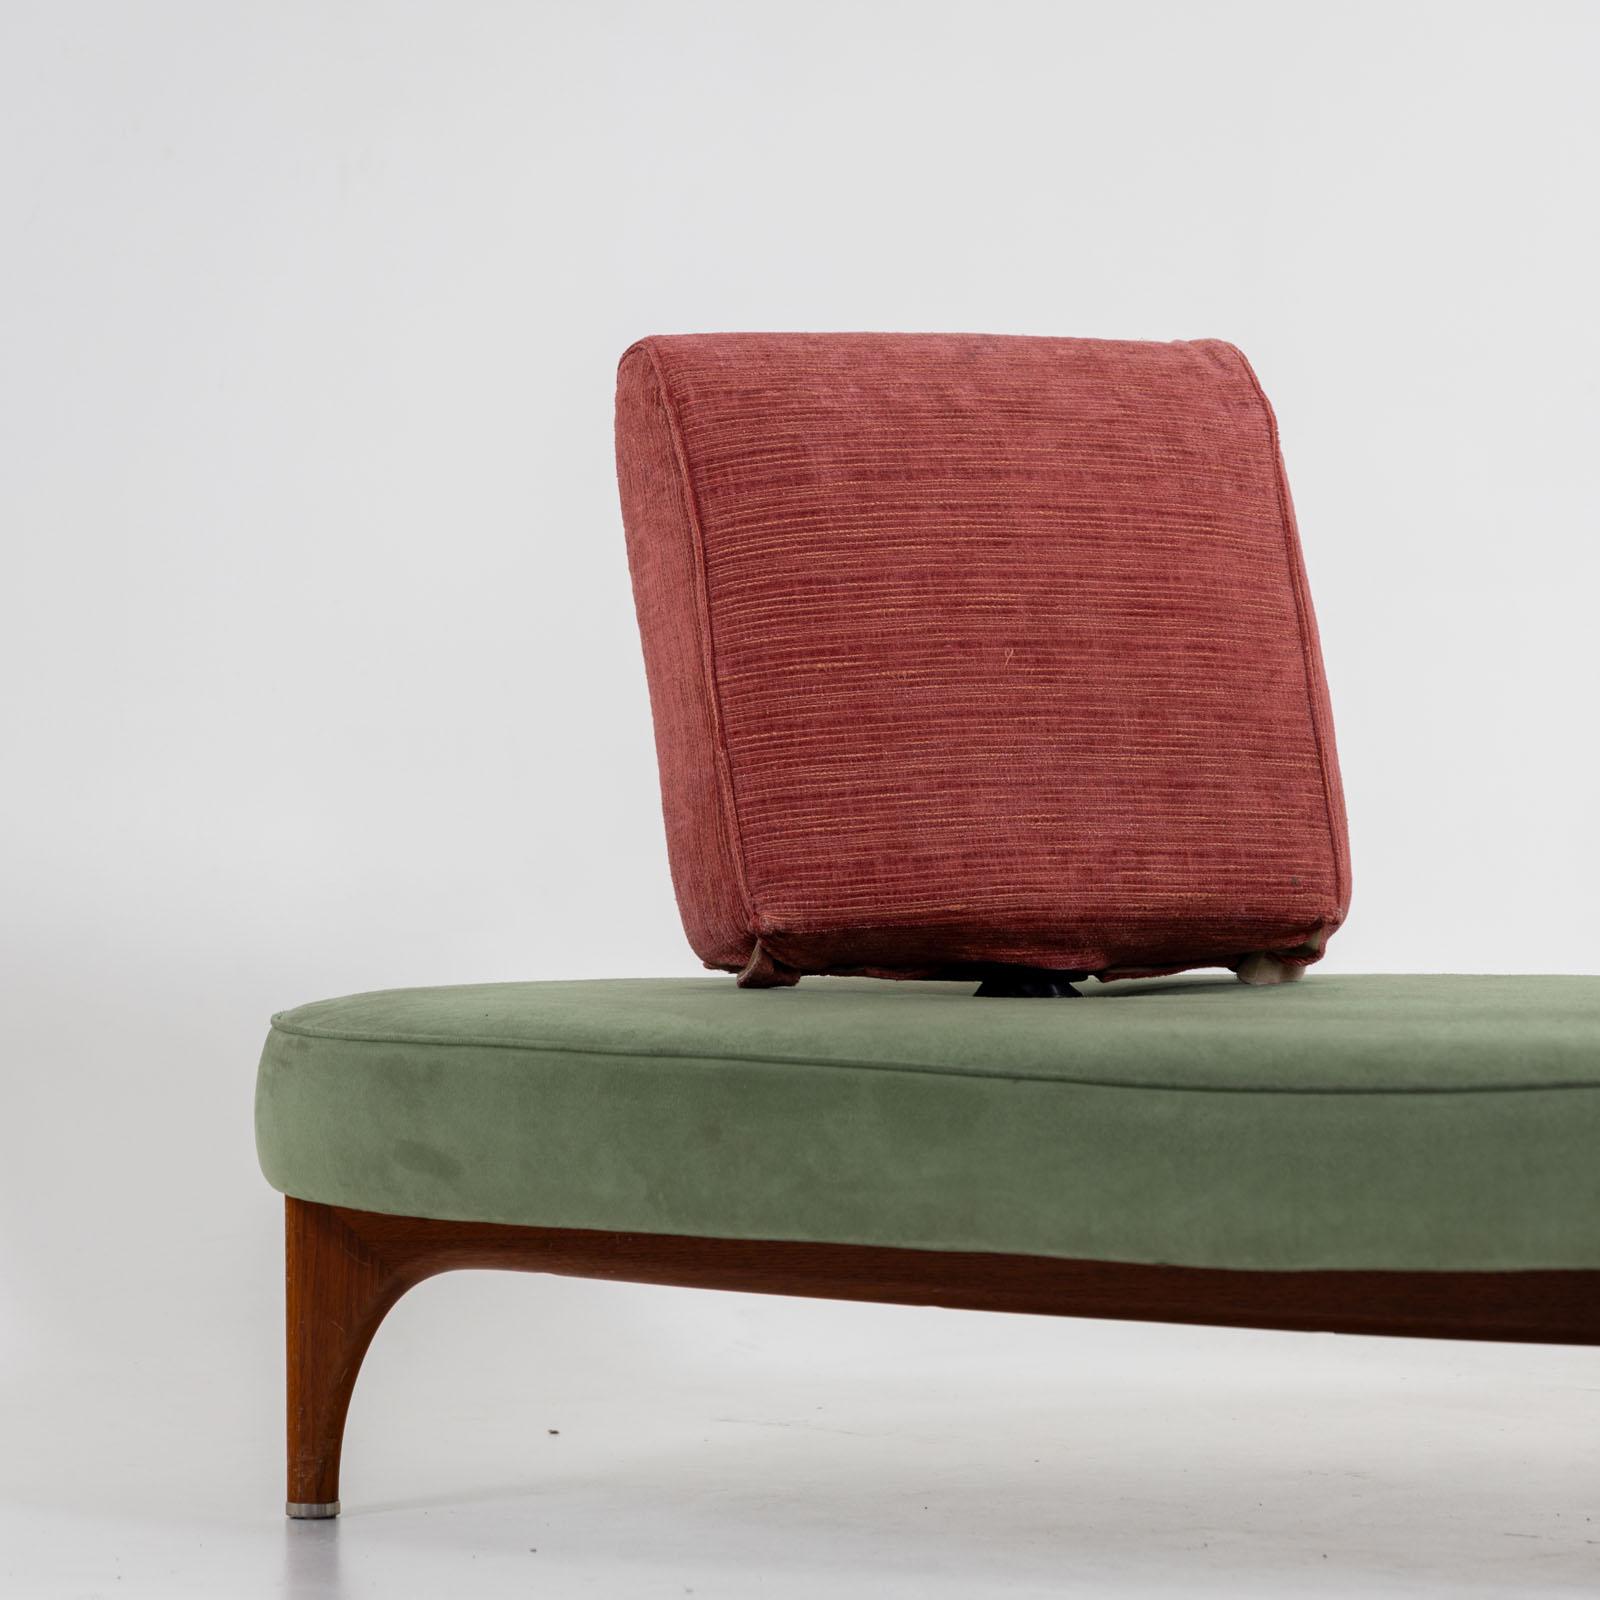 Large sofa with oval seat and rose-colored cushions, which can be turned and bent in any direction. The sofa stands on a smooth wooden base. The upholstery is in good, used condition. The sofa was designed in 1987 by Maarten Kusters (born 1956) for